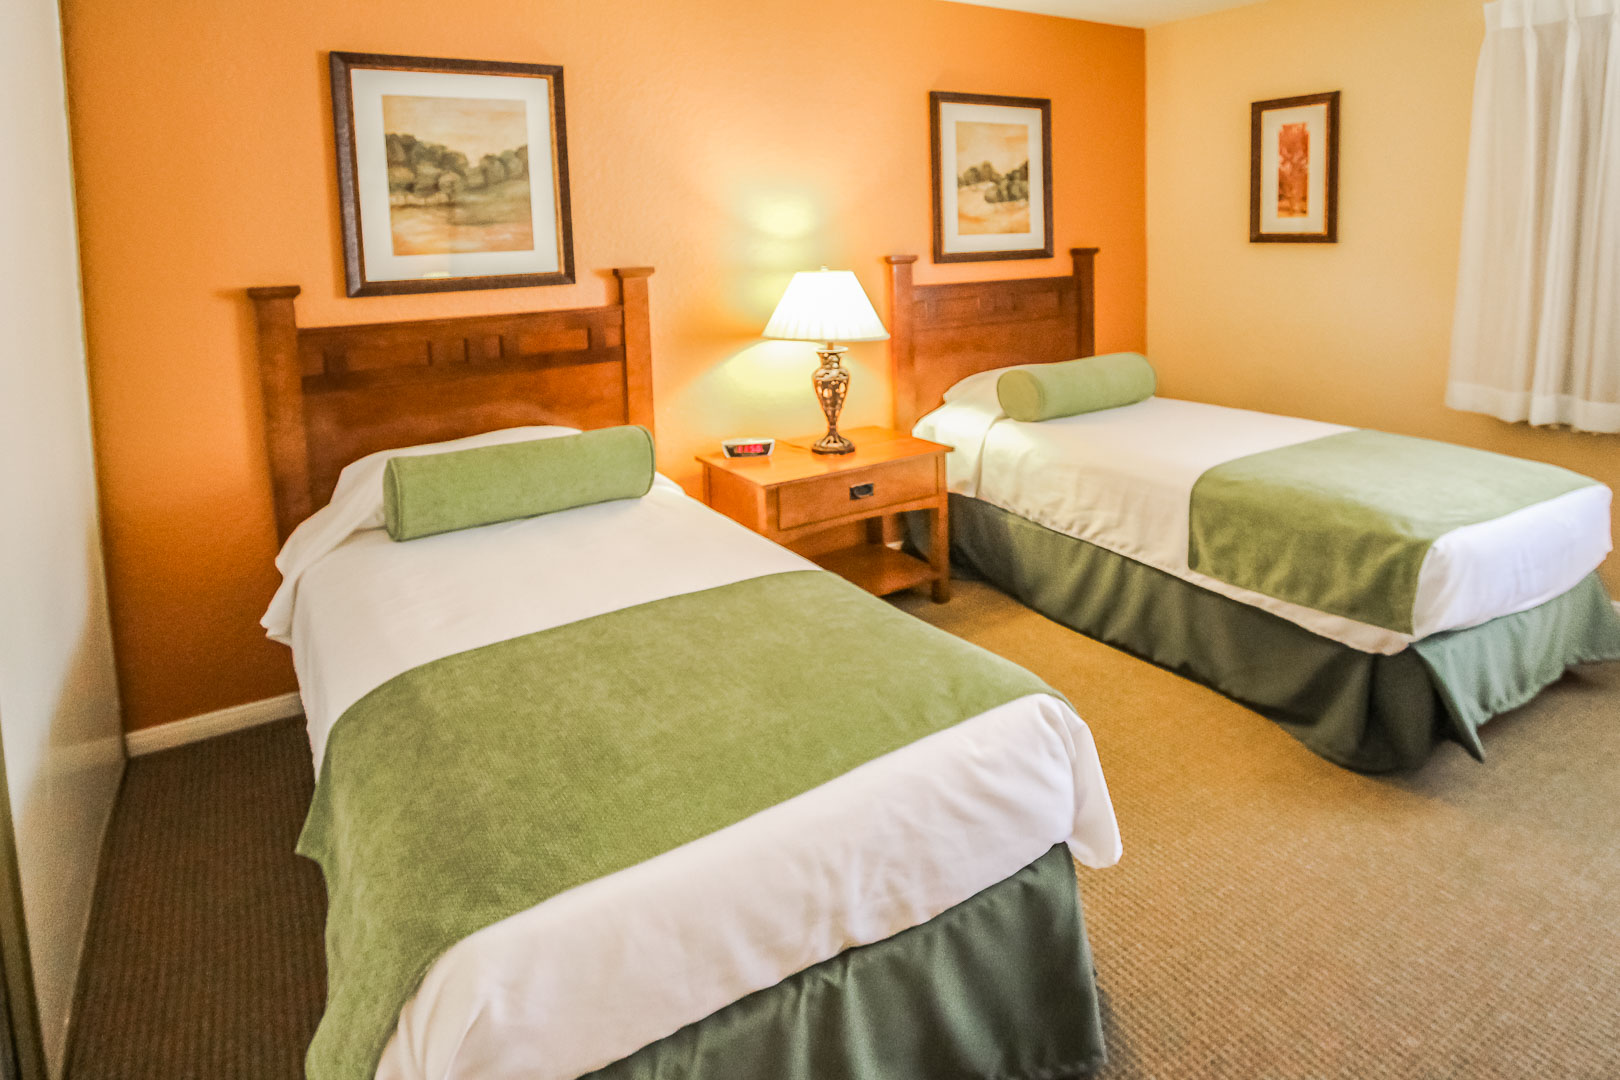 A cozy bedroom with double beds at VRI's Lake Arrowhead Chalets in California.